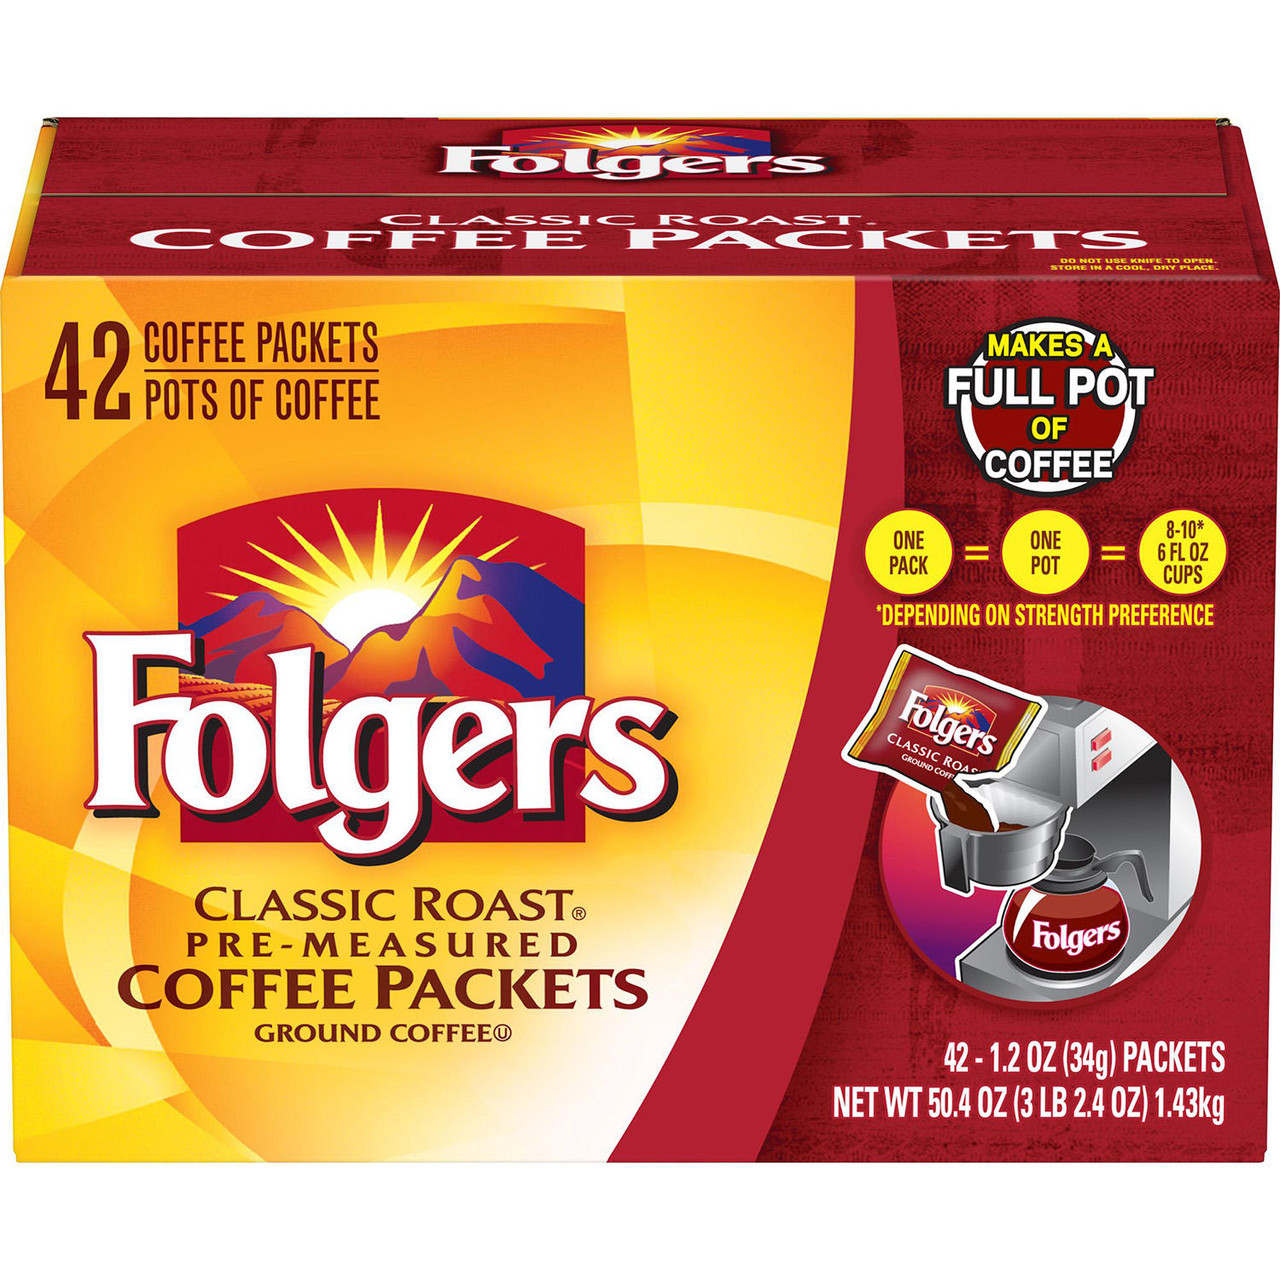 Folgers Classic Roast Ground Coffee Packets (1.2 oz., 42 ct.) - [From 90.00 - Choose pk Qty ] - *Ships from Miami